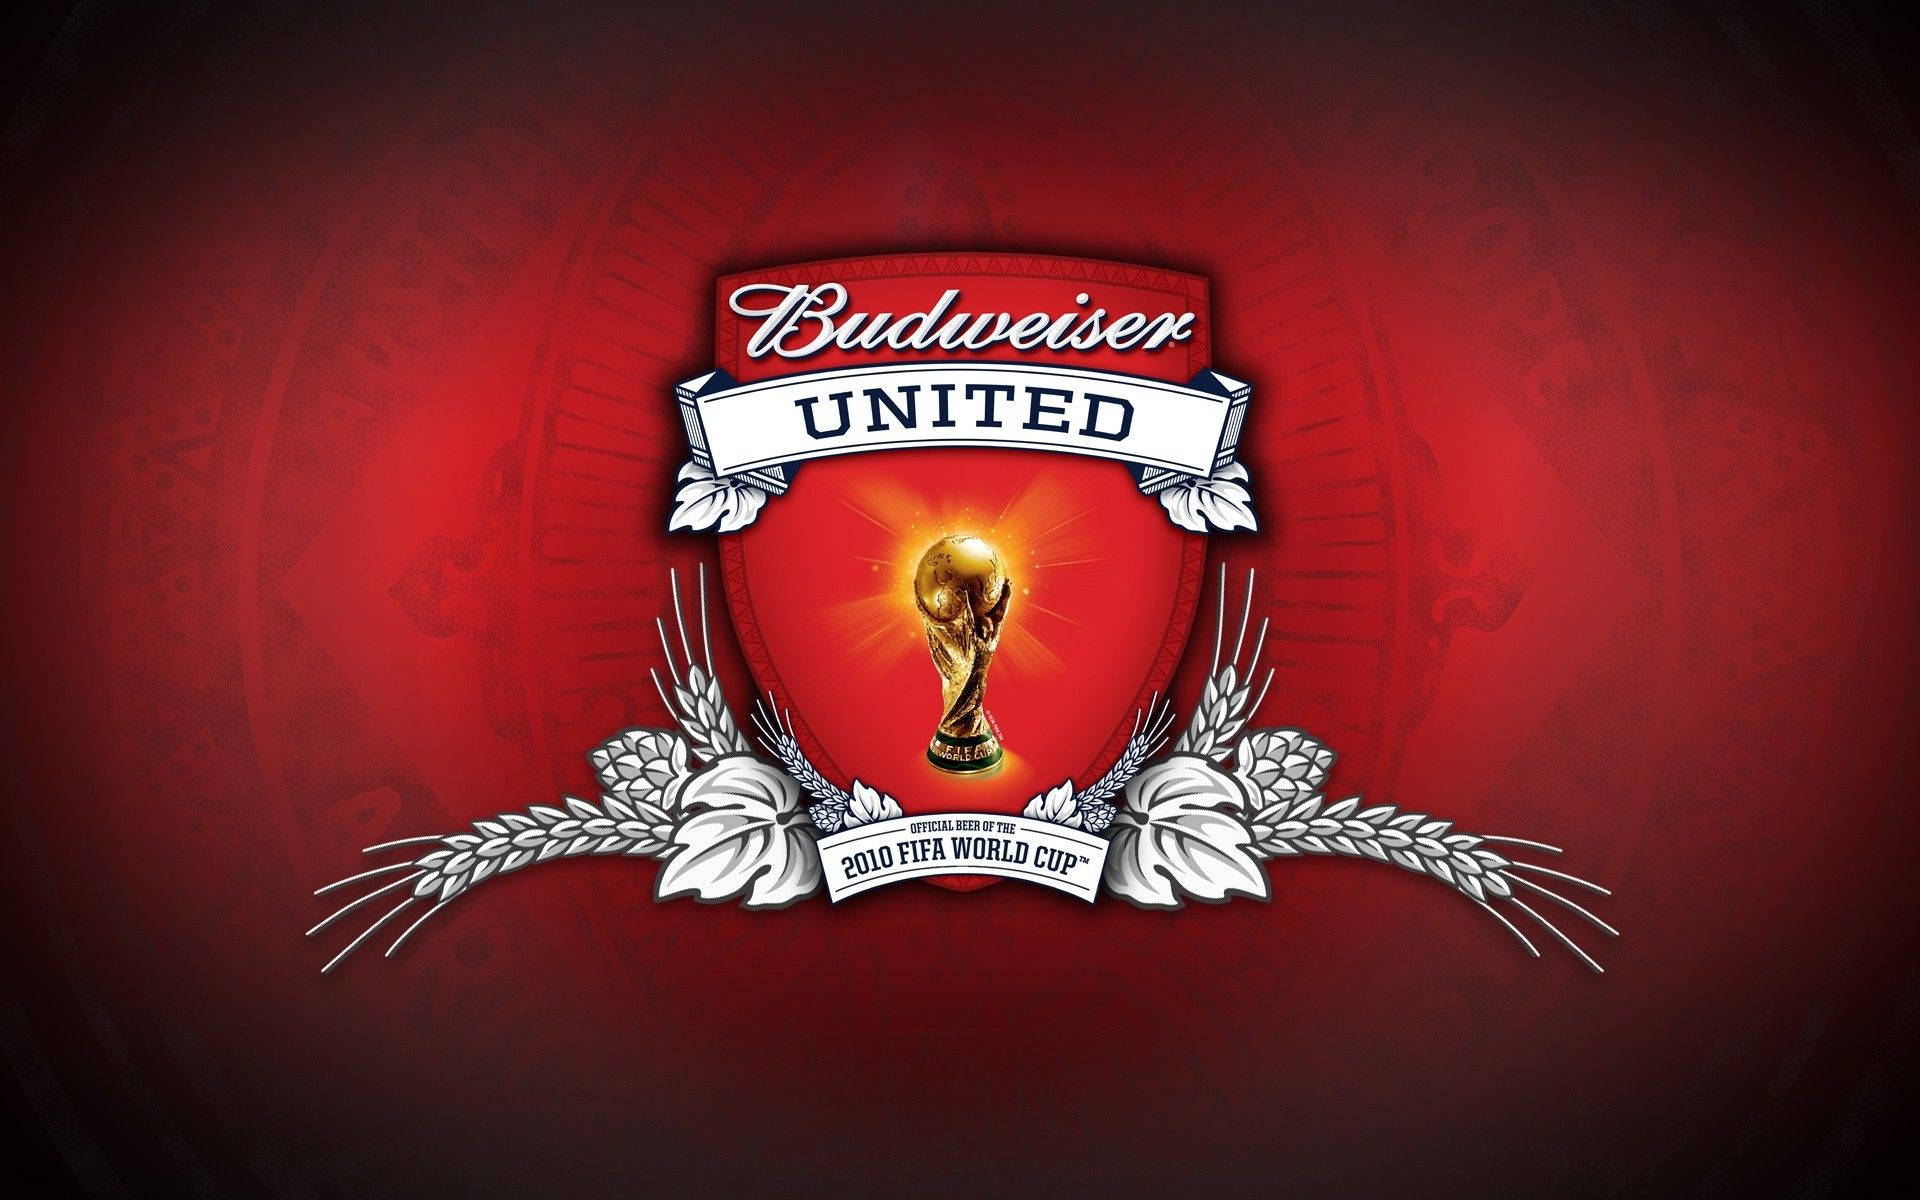 Fifa World Cup Budweiser Brand Picture